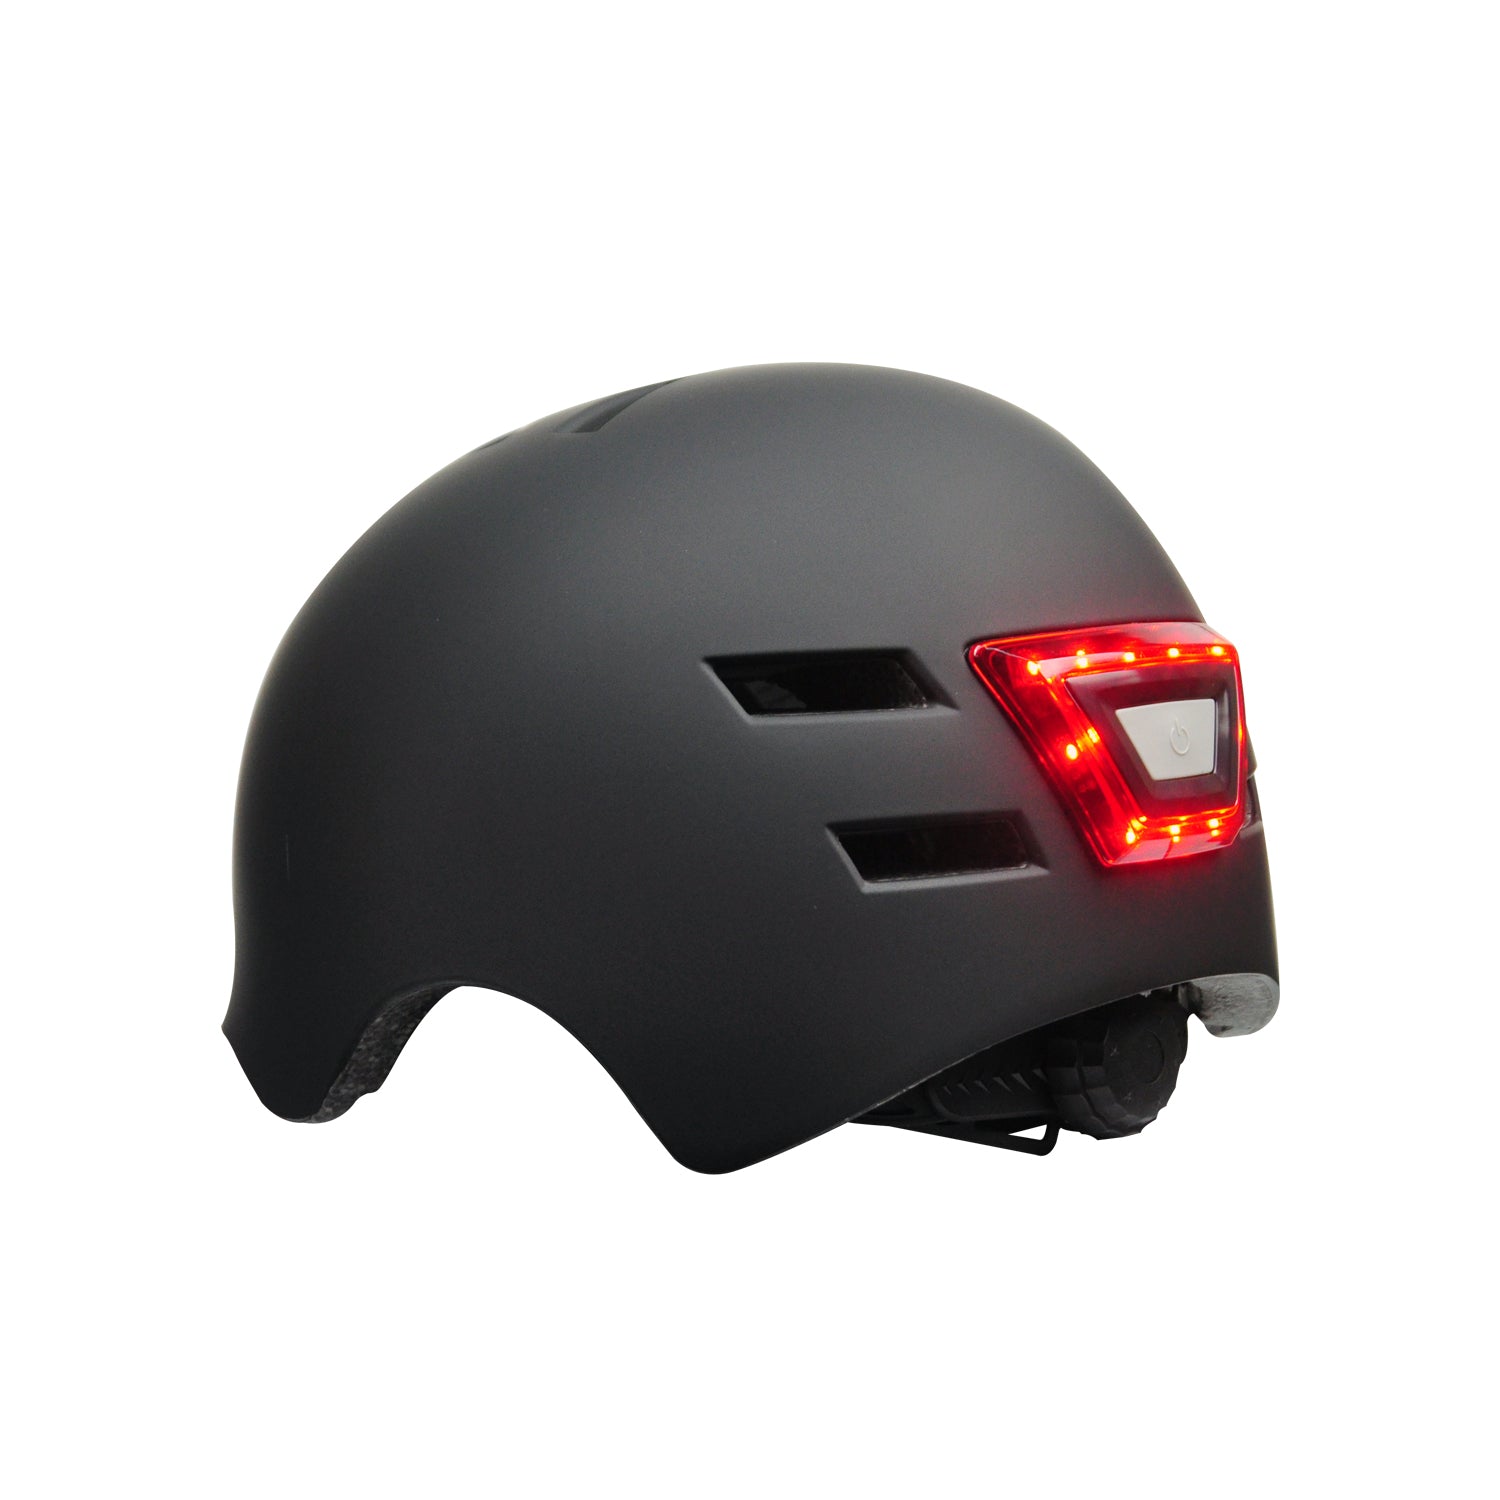 Apachie Essential Helmet with Front and Rear LED Lights